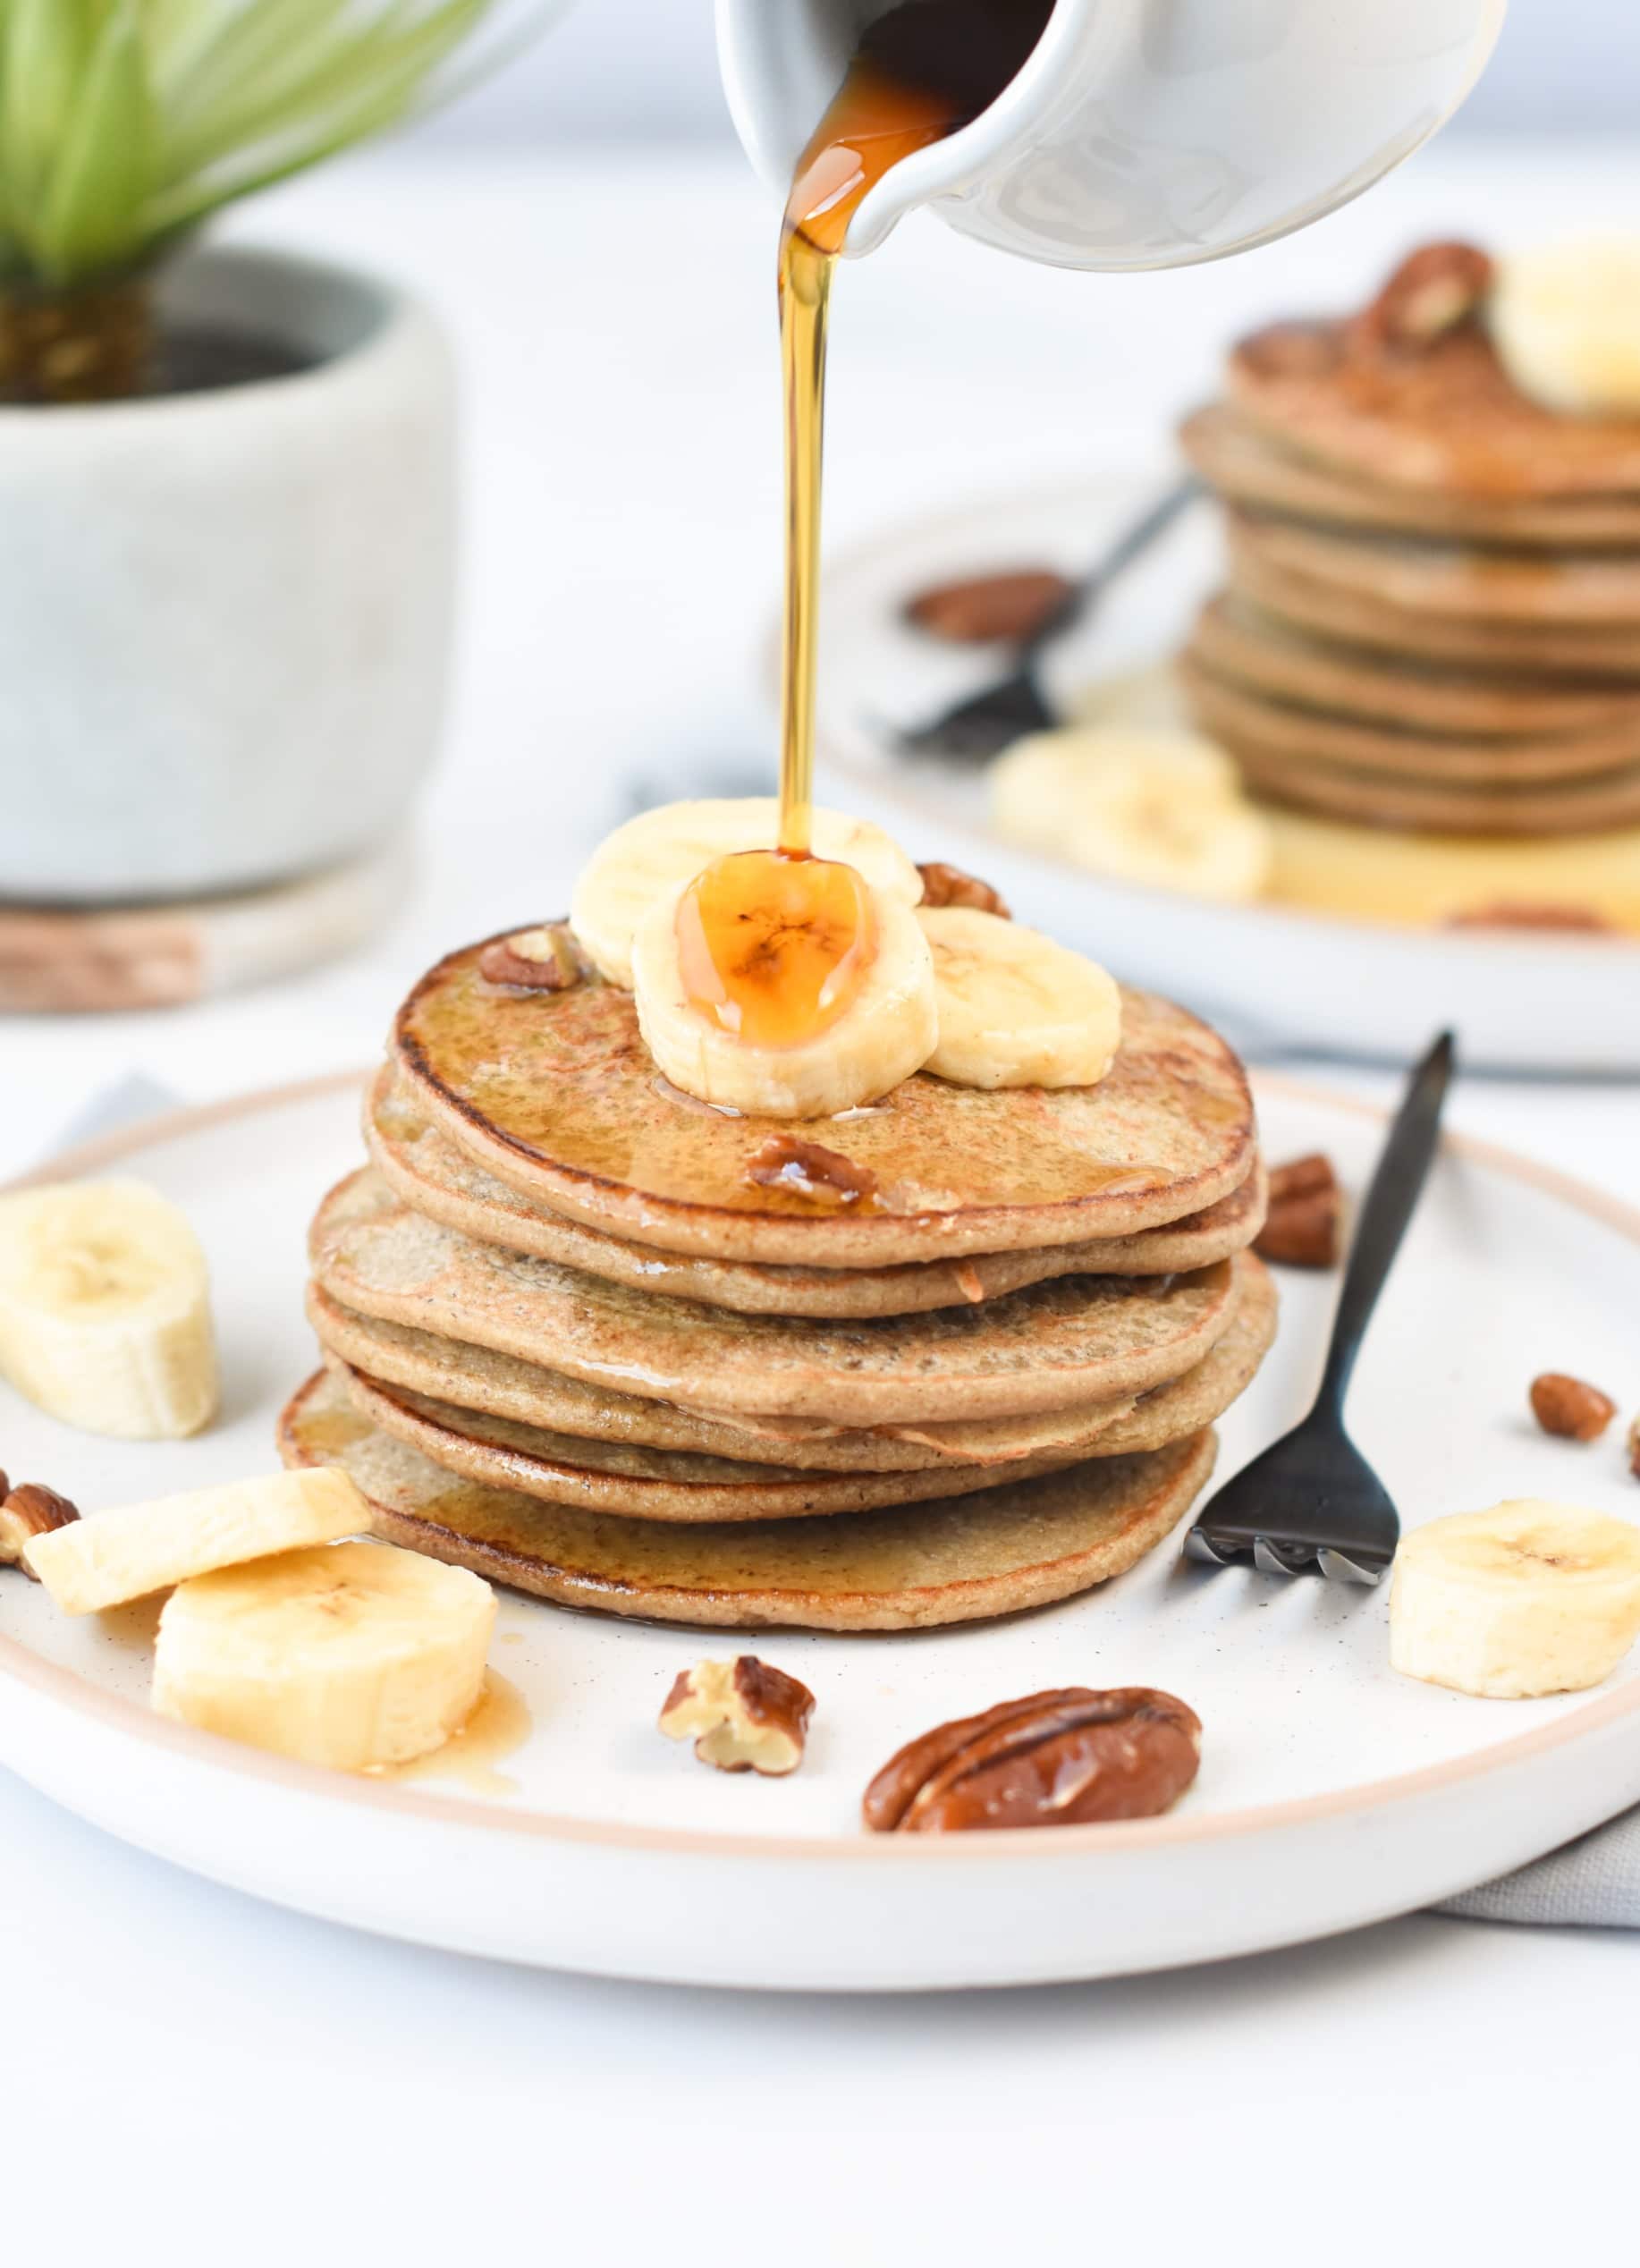 Pouring maple syrup on 3-ingredient banana oat pancakes decorated with banana slices.